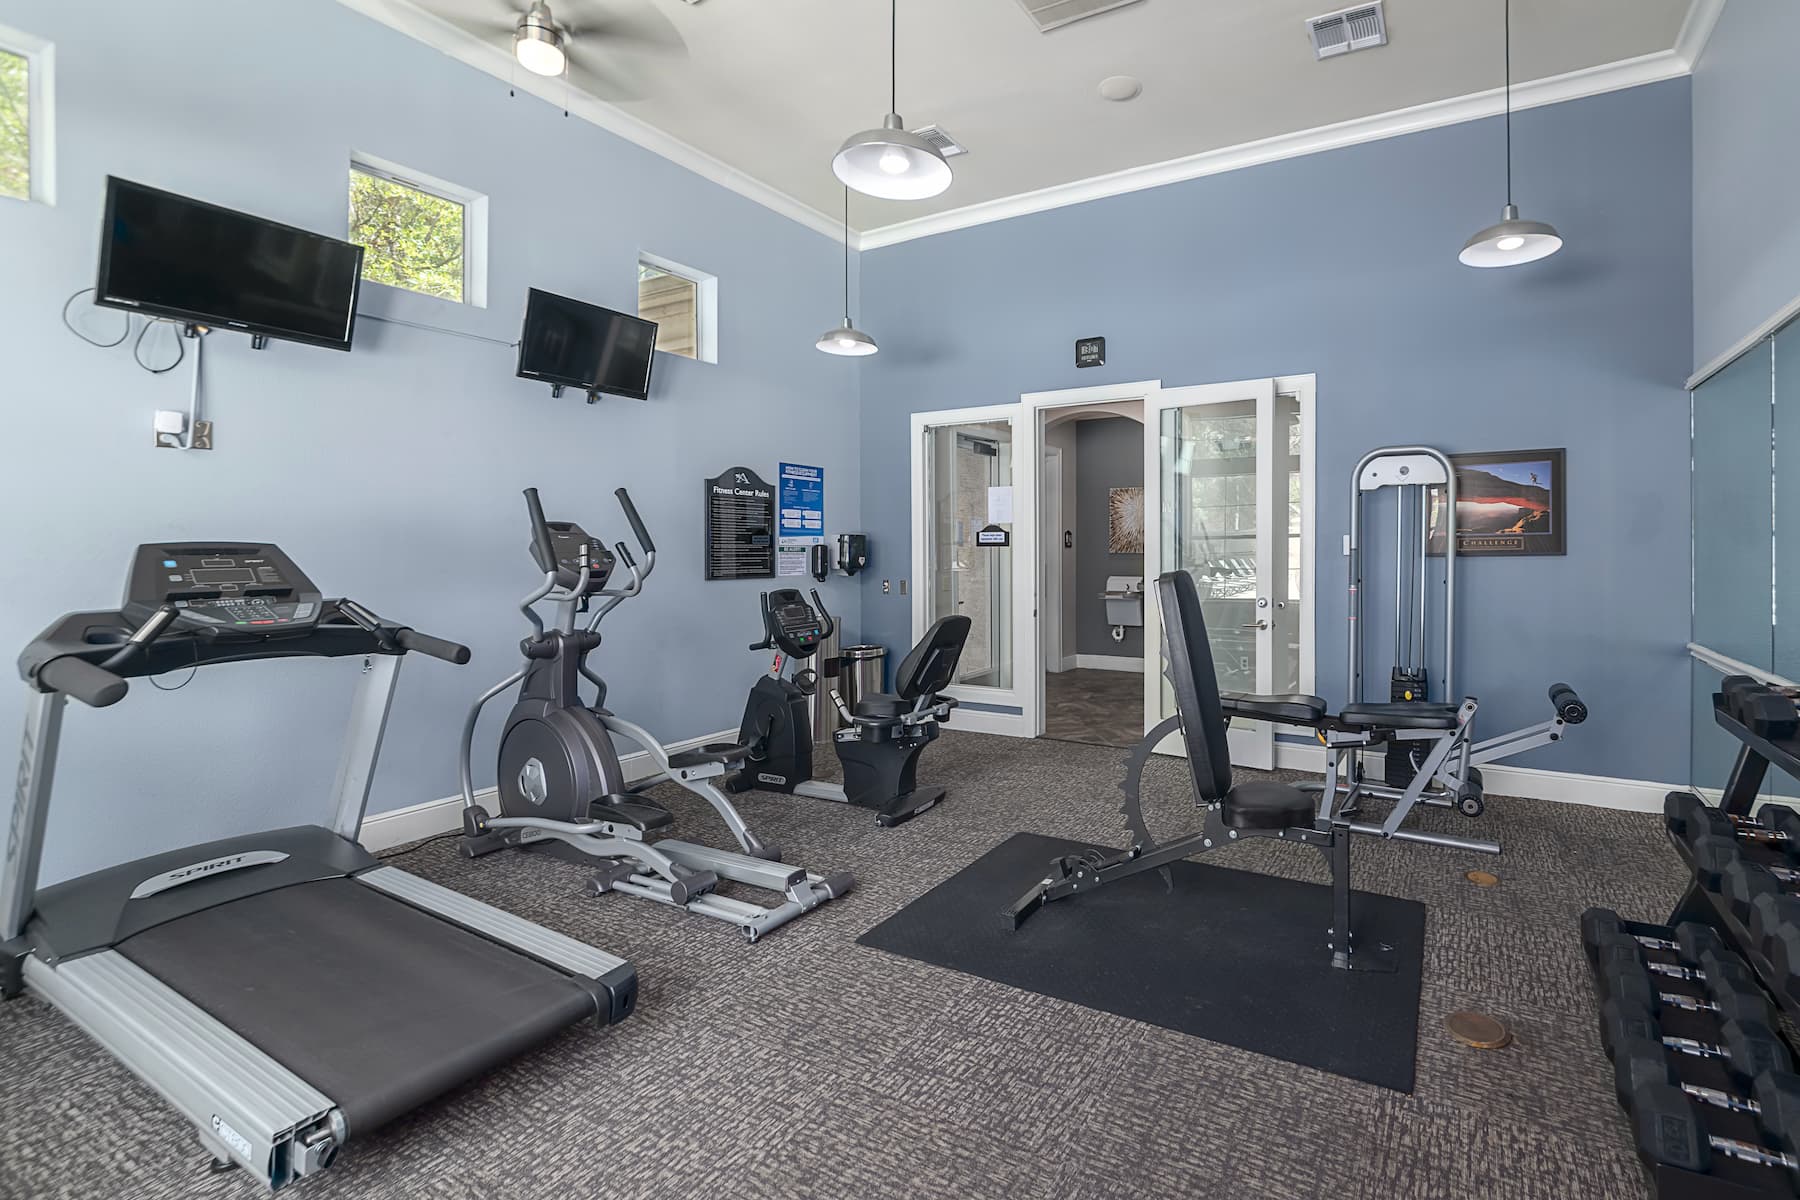 get your daily exercise routine done in our fitness room with modern equipment